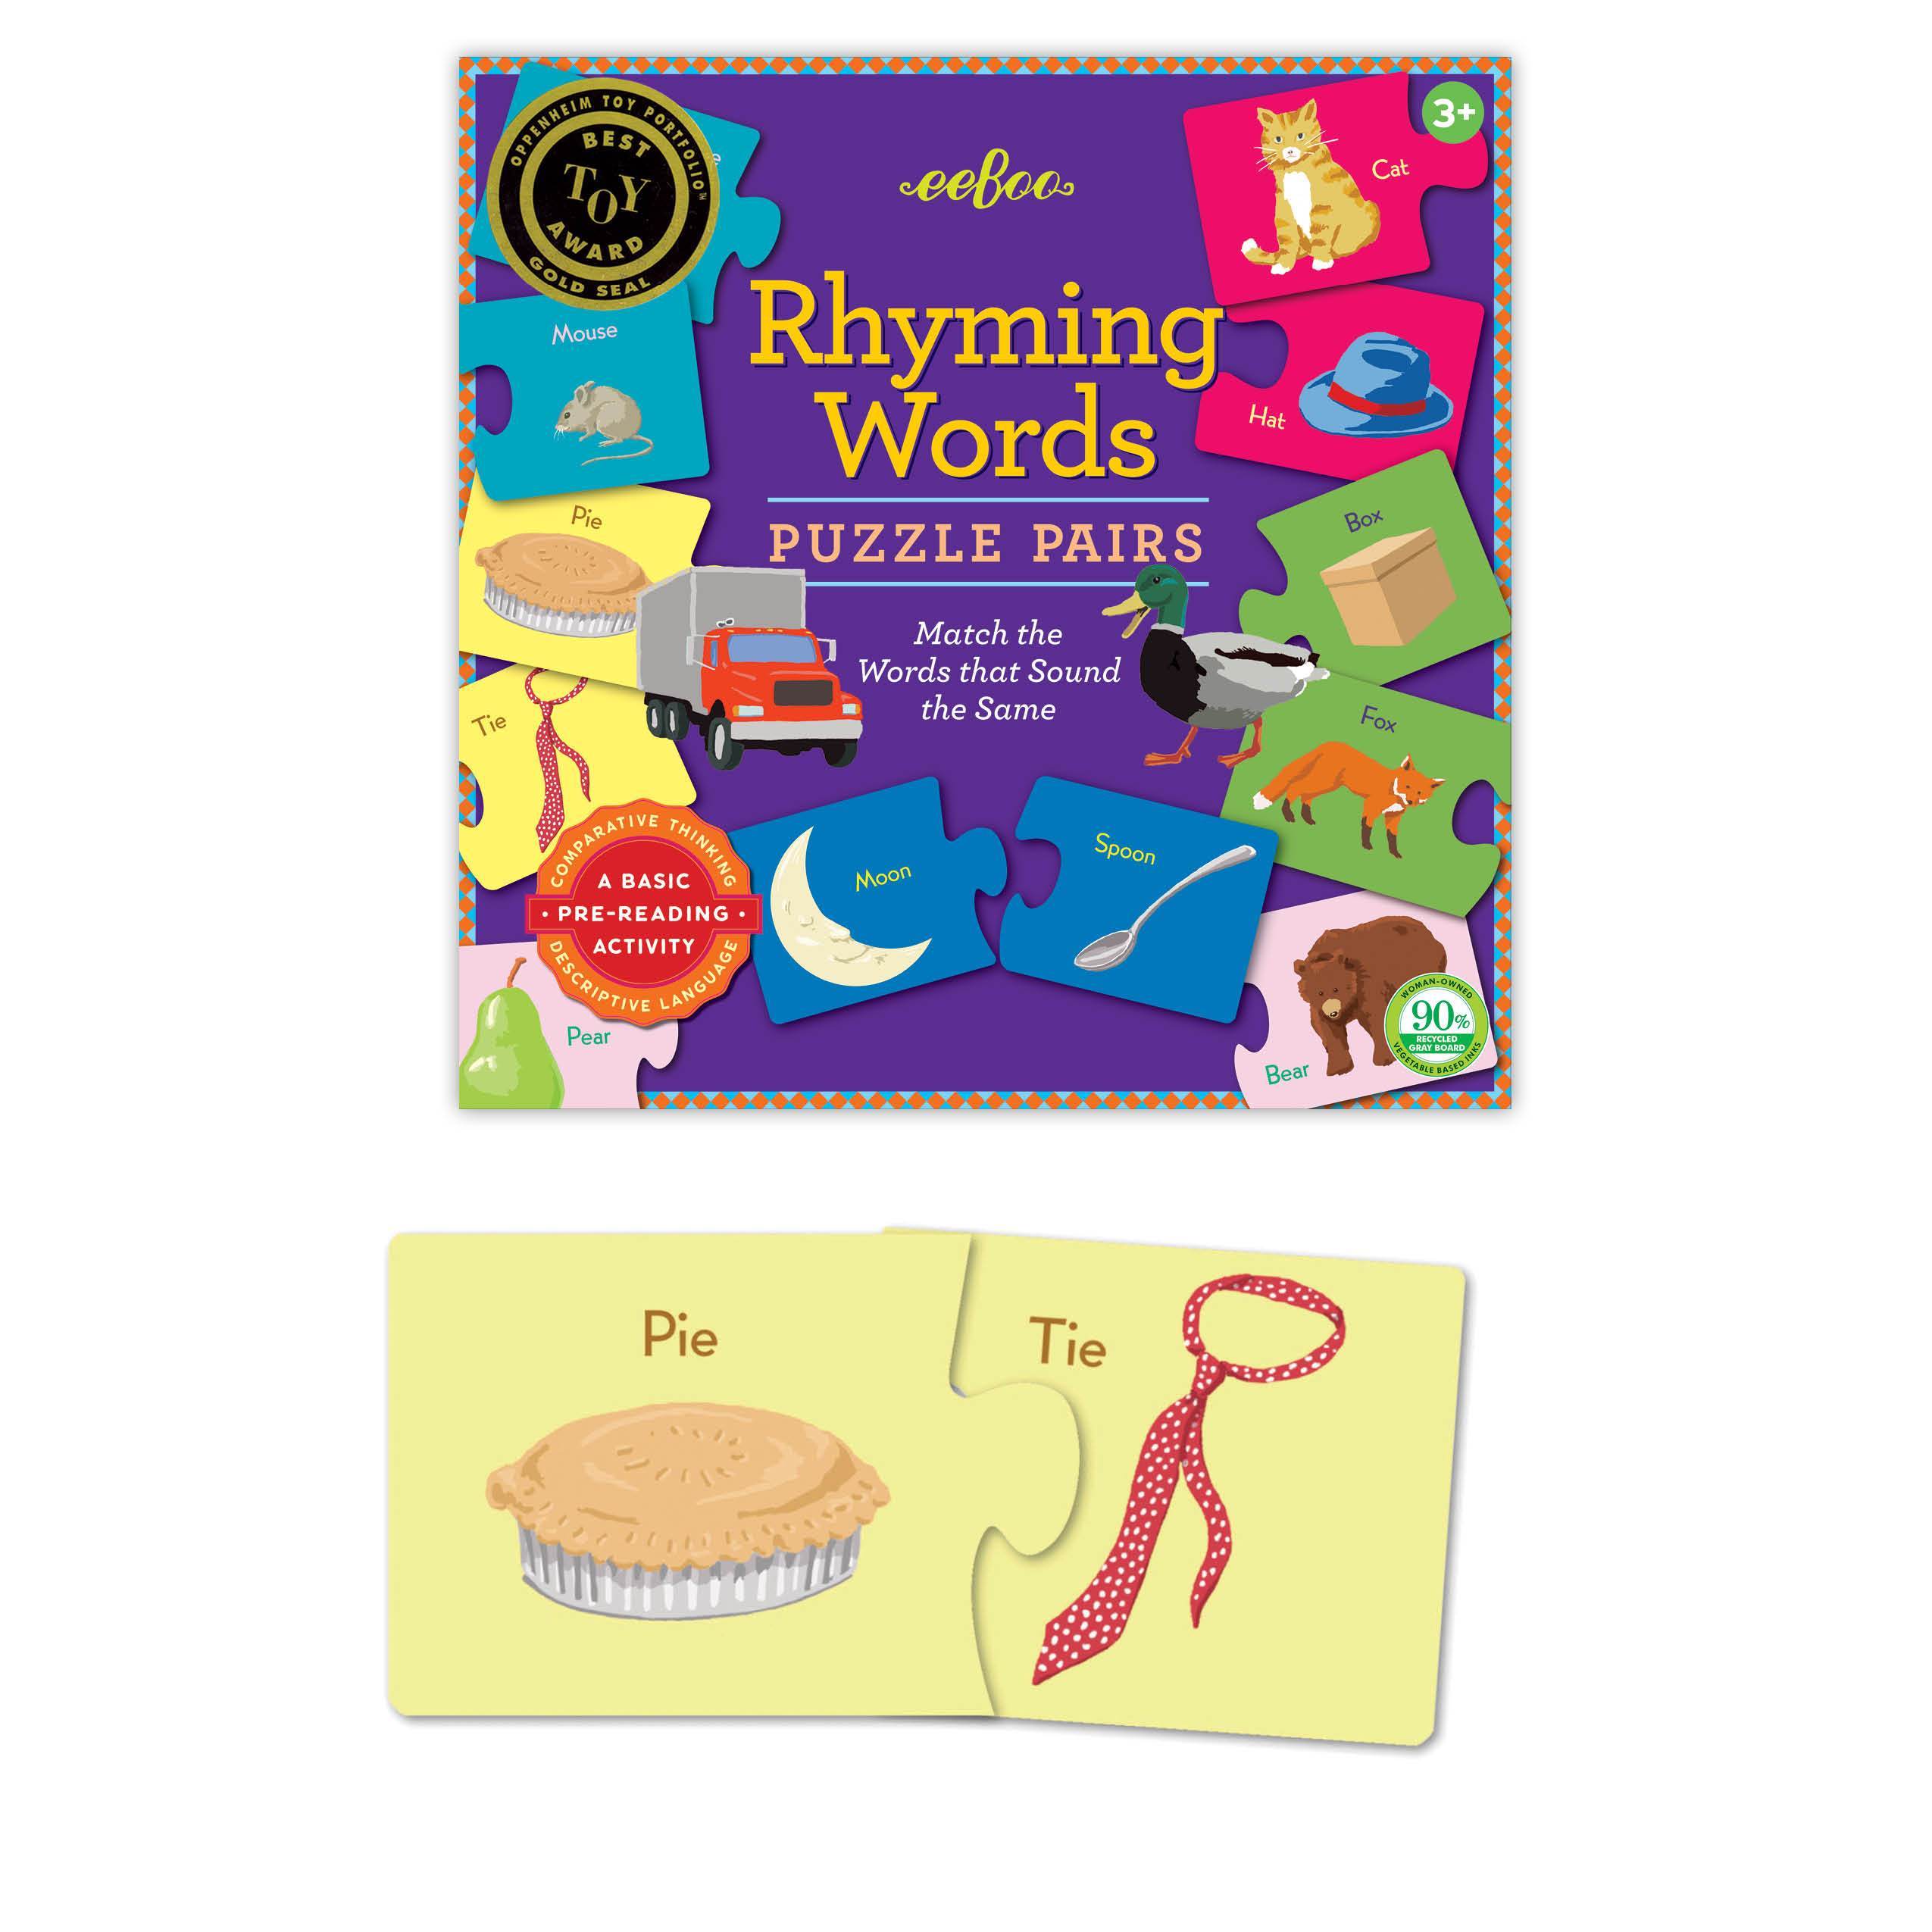 Rhyming Words Puzzle Pairs    